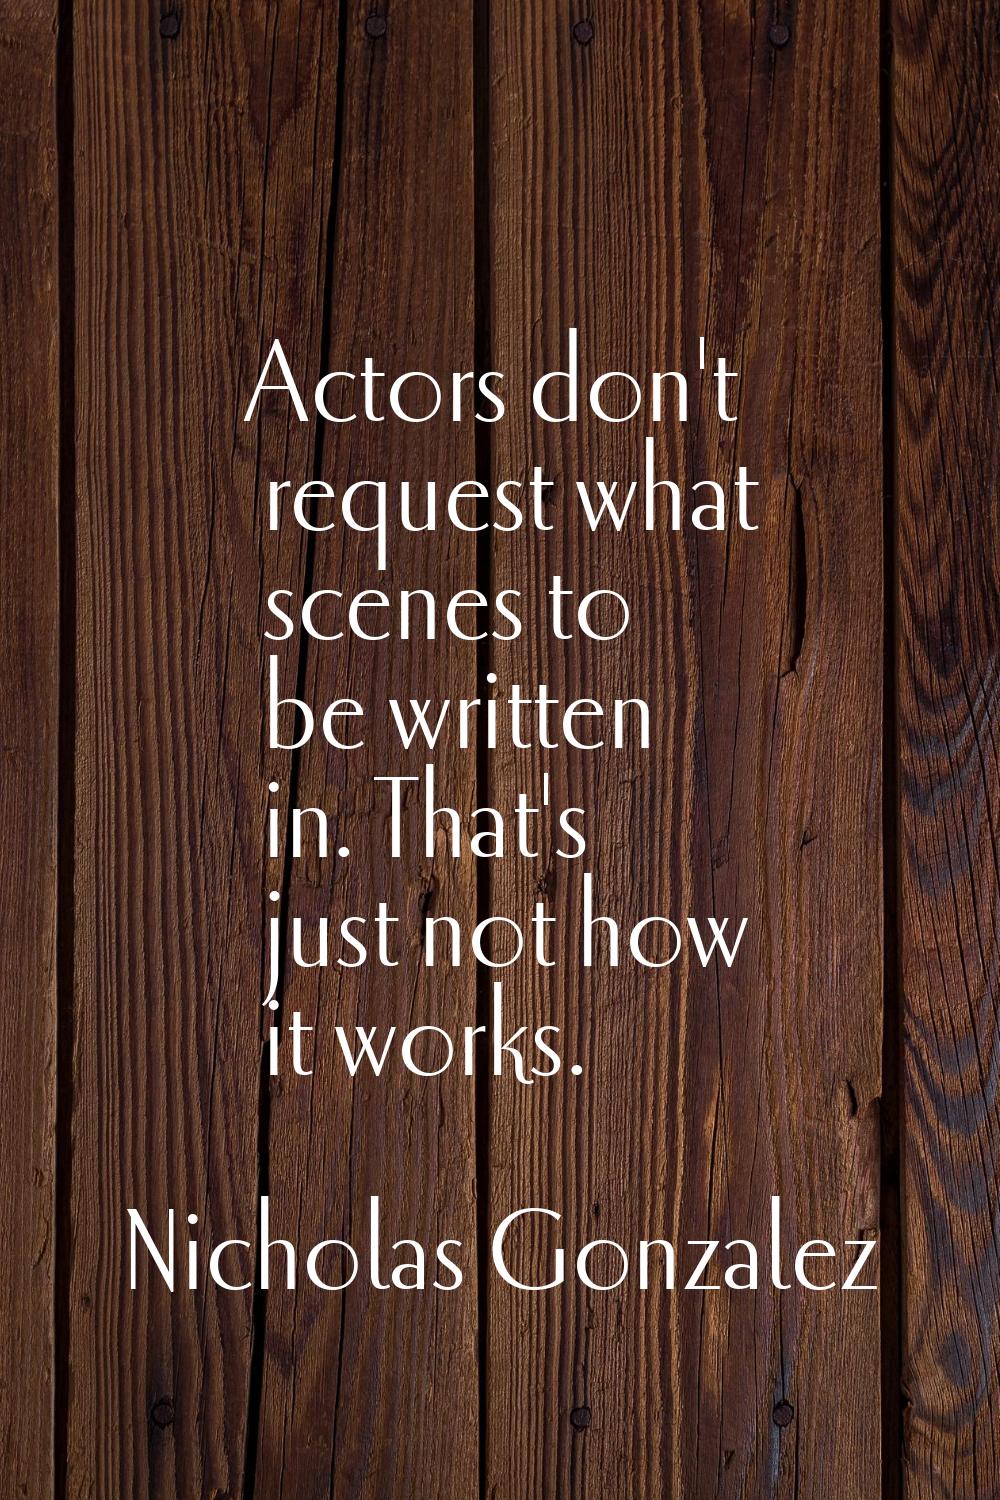 Actors don't request what scenes to be written in. That's just not how it works.